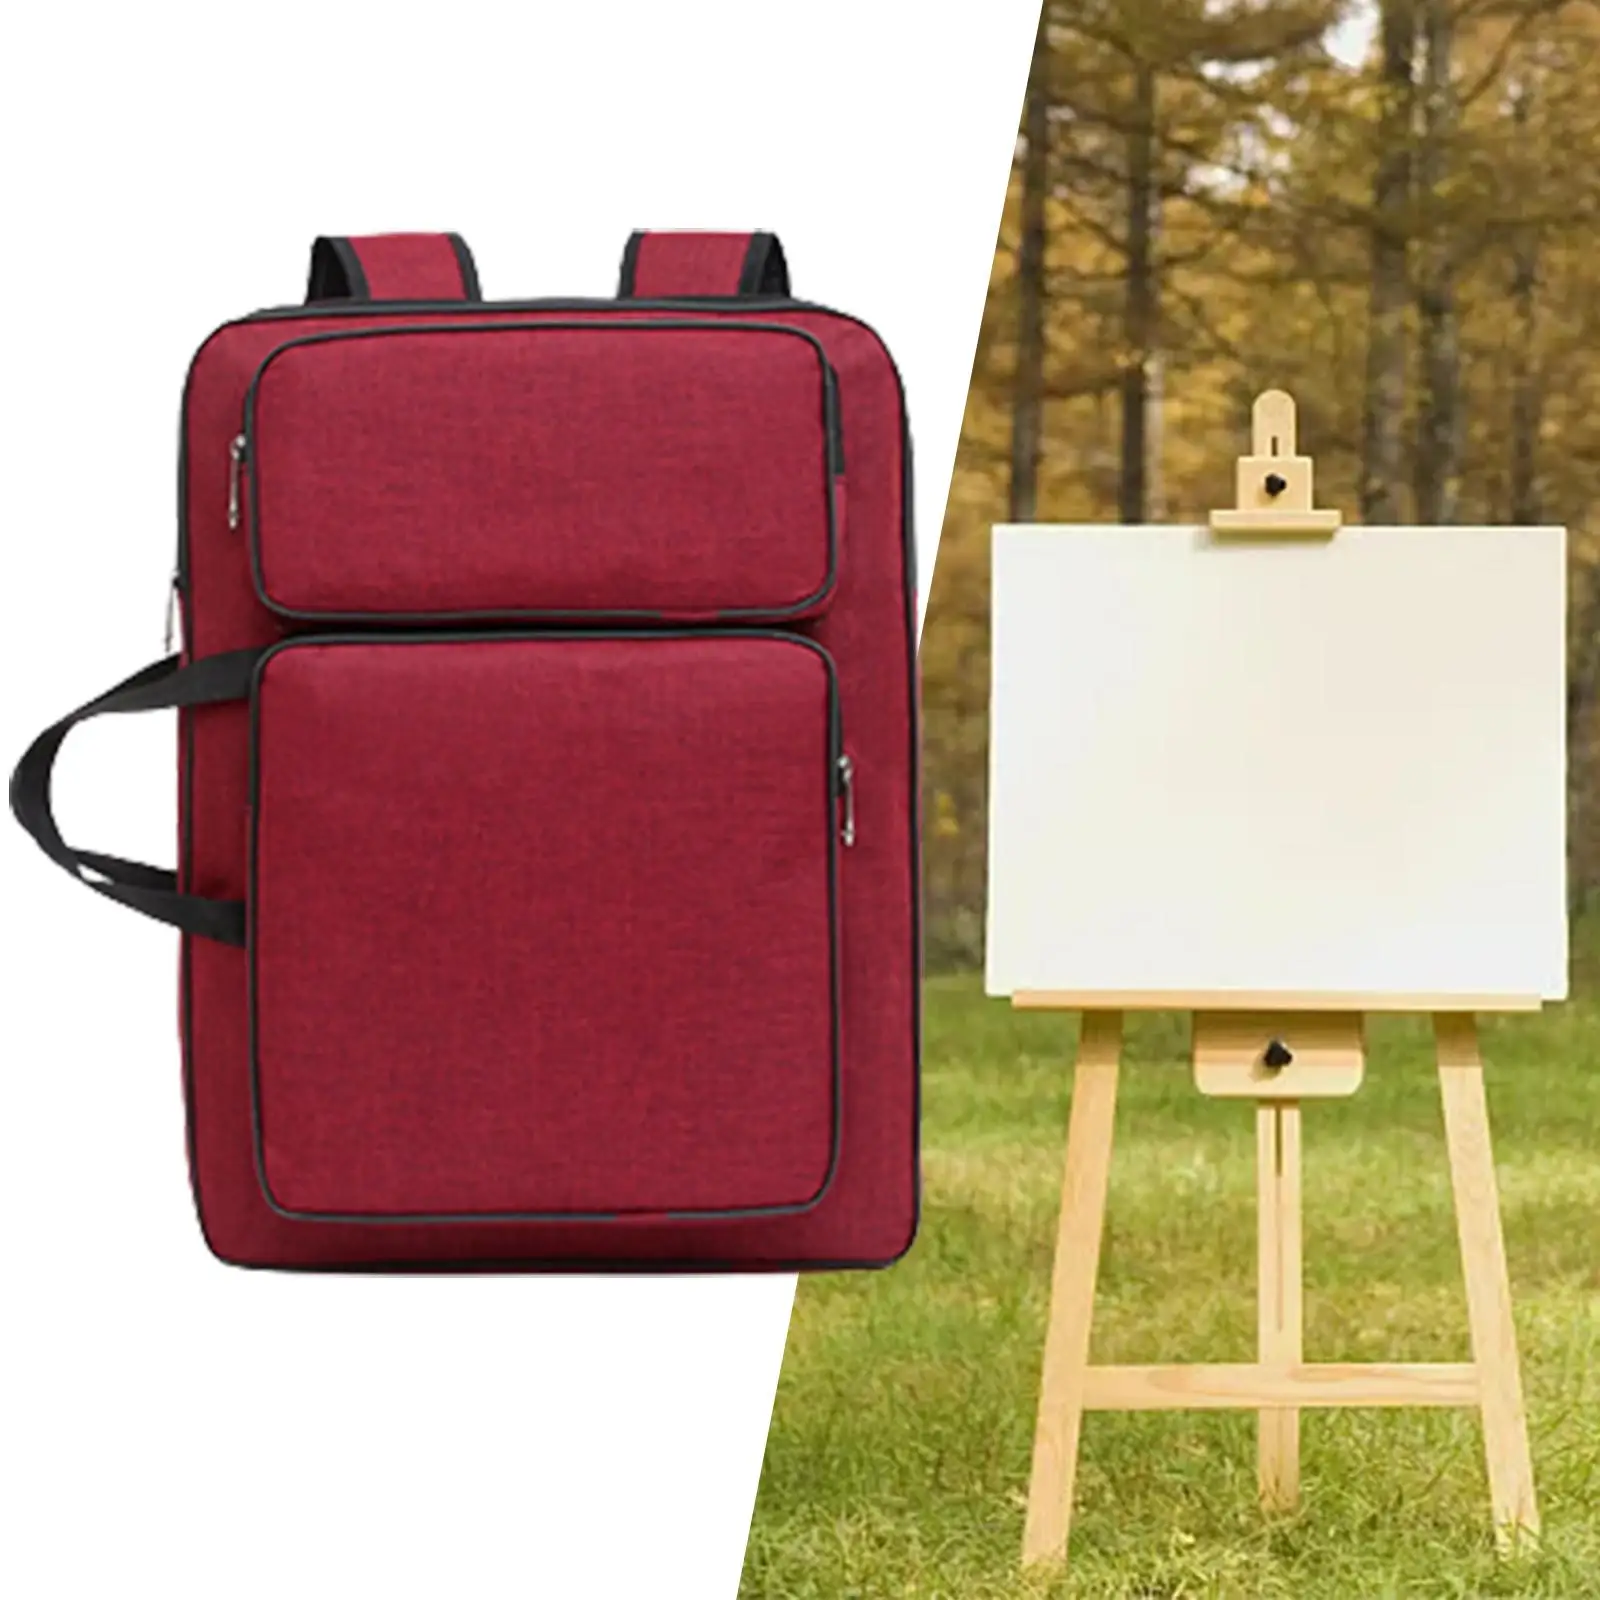 Draw Board Storage Tote Art Portfolio Case for Easel Paper Painting Supplies